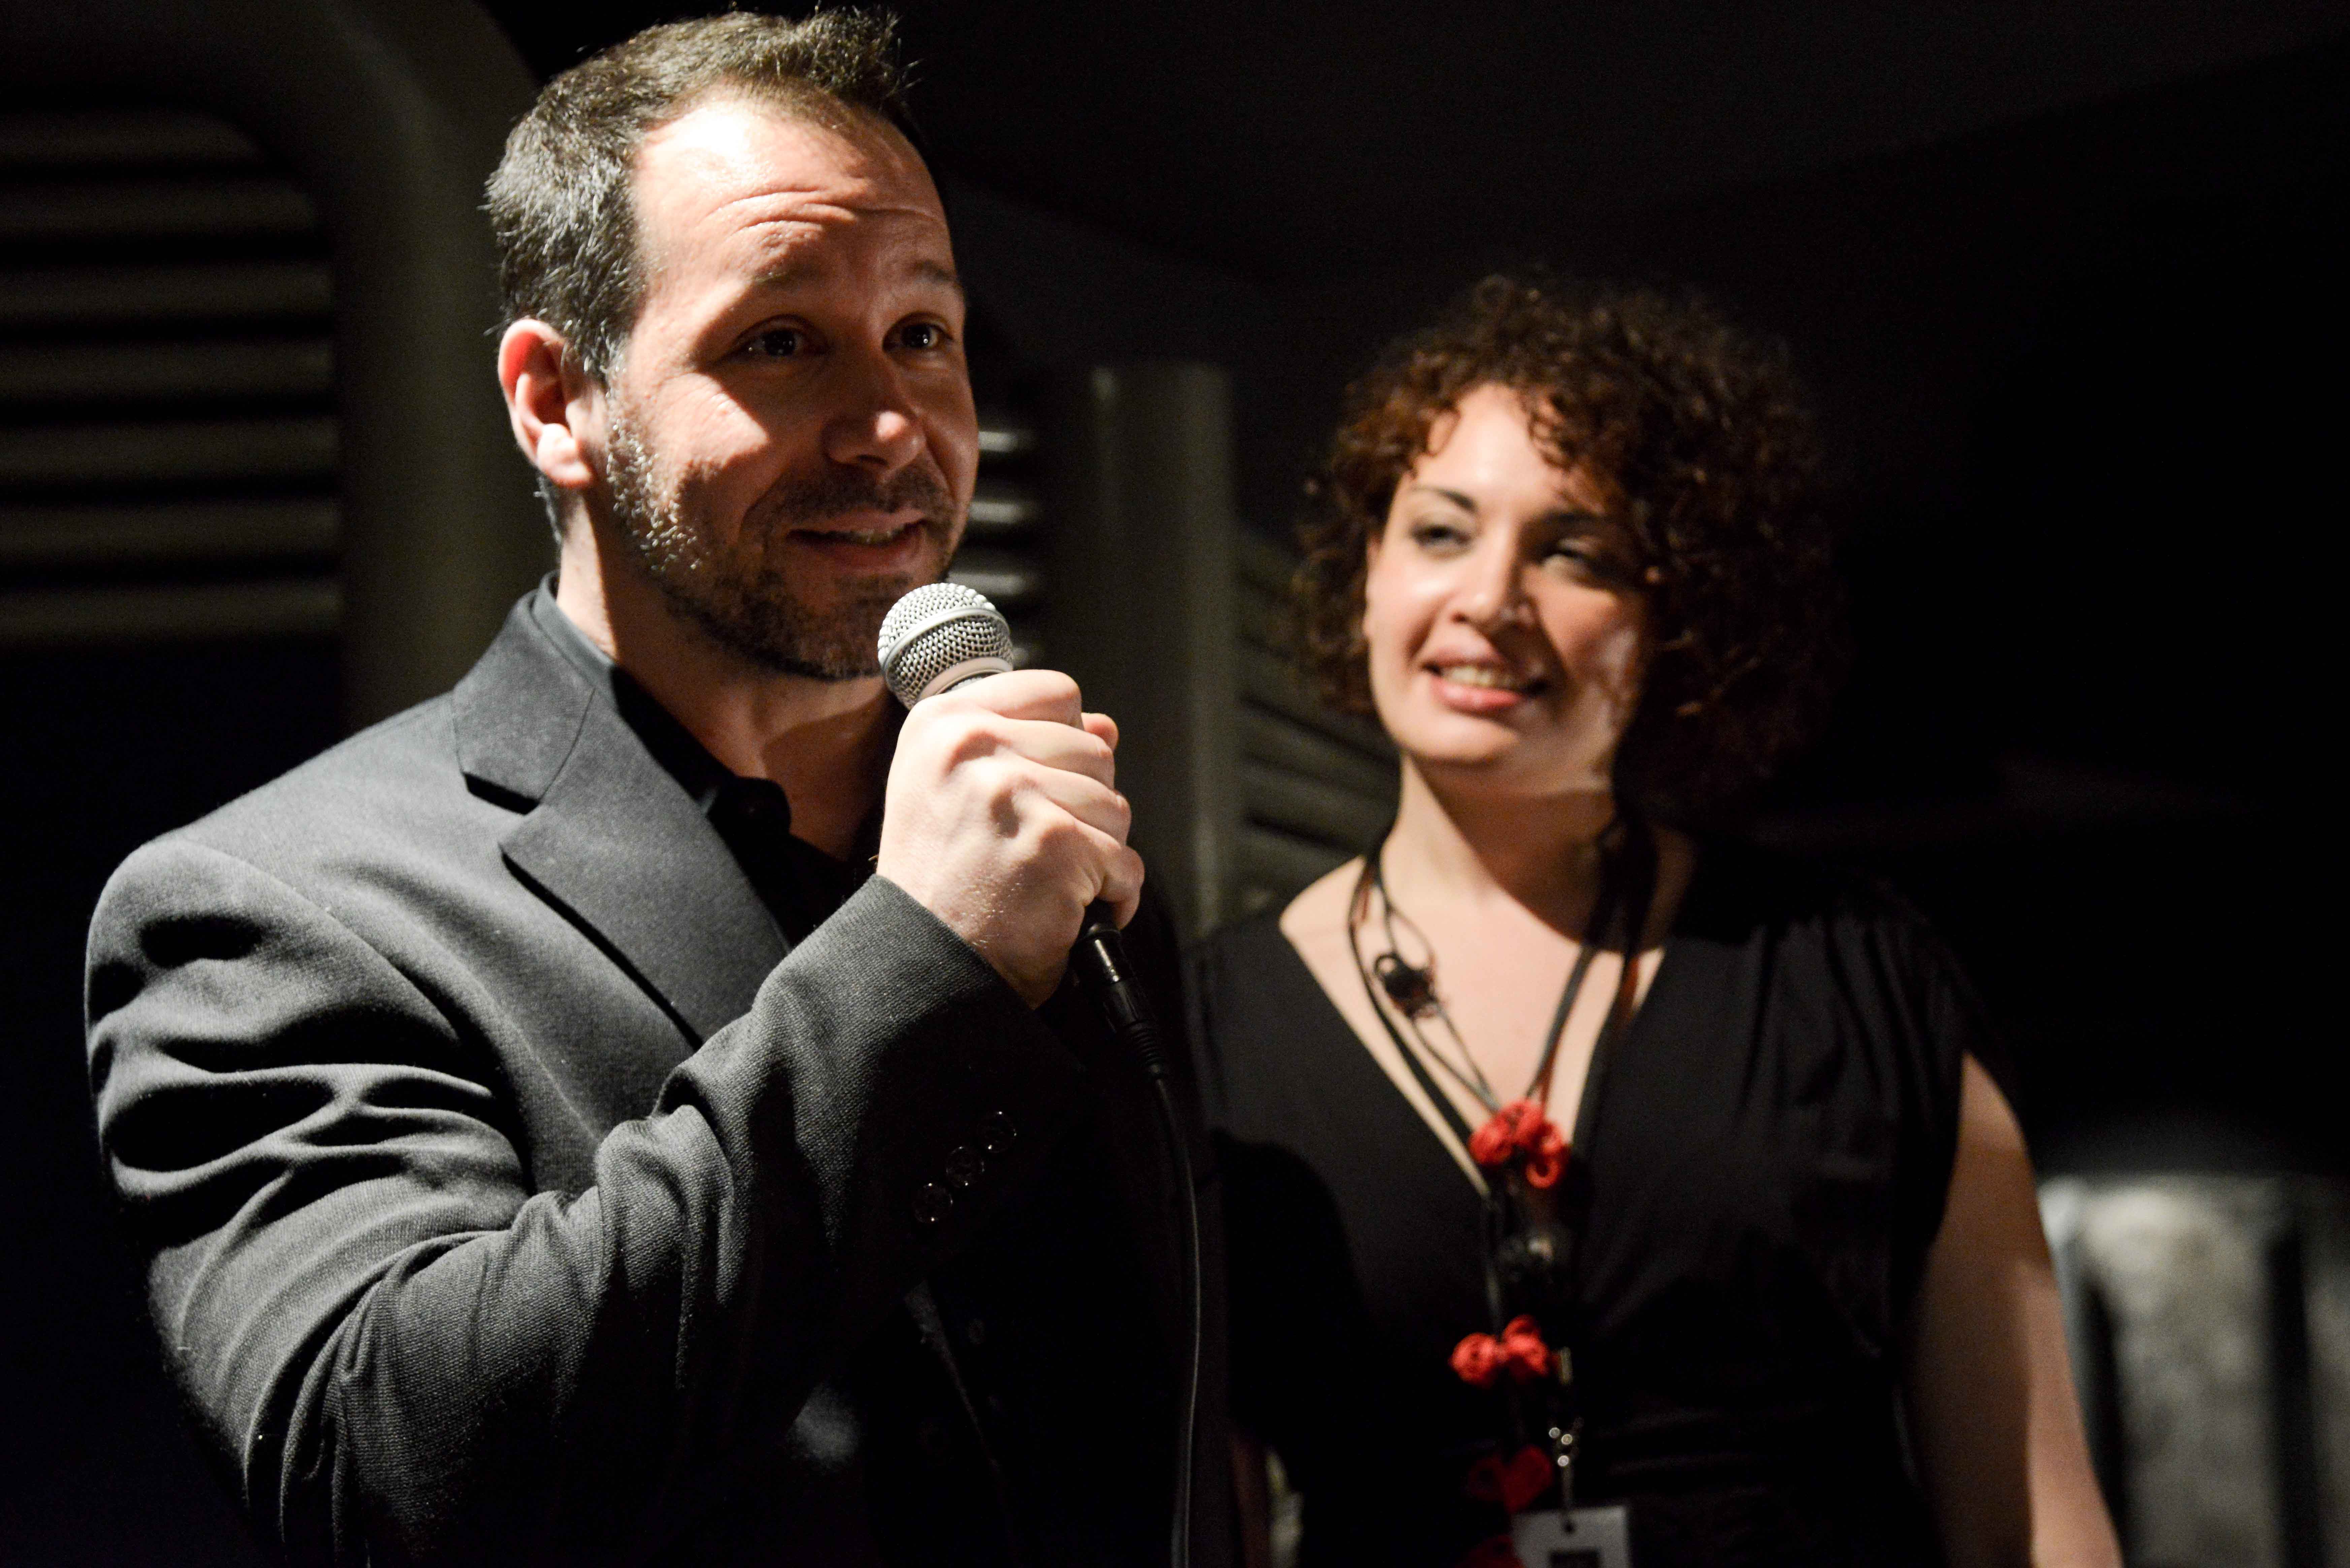 Dan Eberle and Danielle Primiceri accepting the audience award for 'Cut to Black' at the 16th Annual Brooklyn Film Festival.